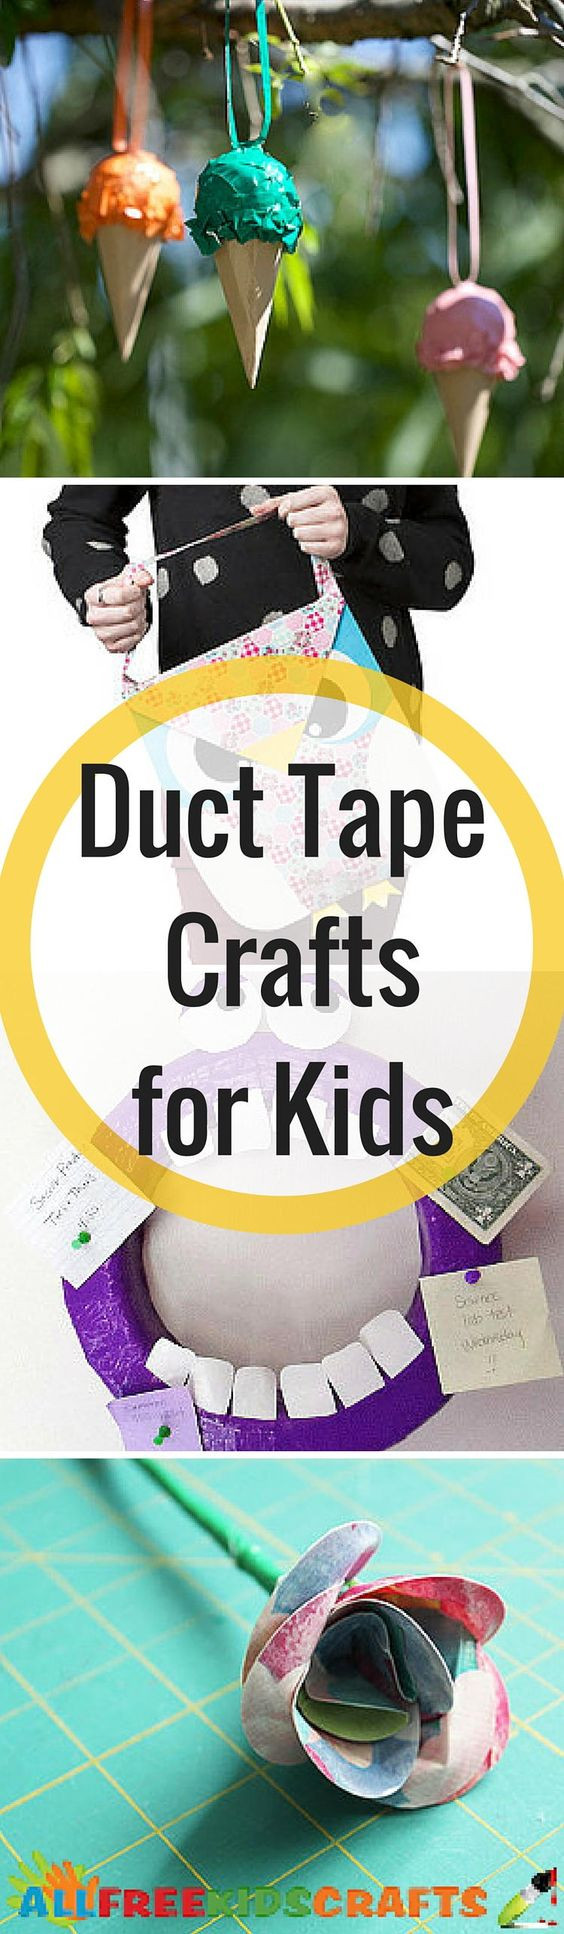 Duct Tape Projects For Kids
 Duct tape crafts Duct tape and Crafts for kids on Pinterest